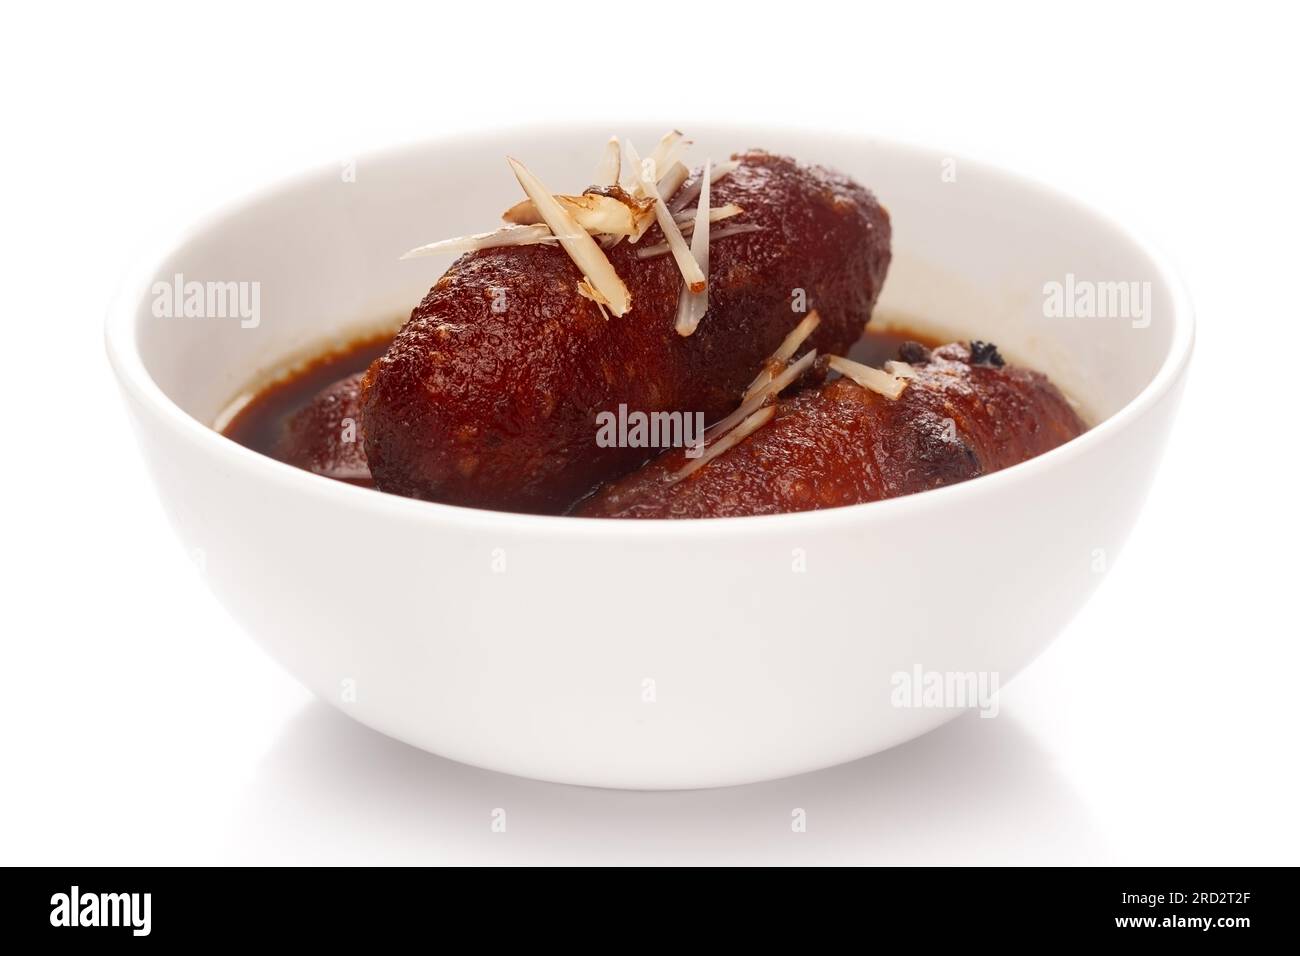 Close-up of Indian Bangali traditional sweet dish Pitha or Peetha ( Roshopuli ) made from red sweet potato, garnished with chopped almond and dry nuts Stock Photo